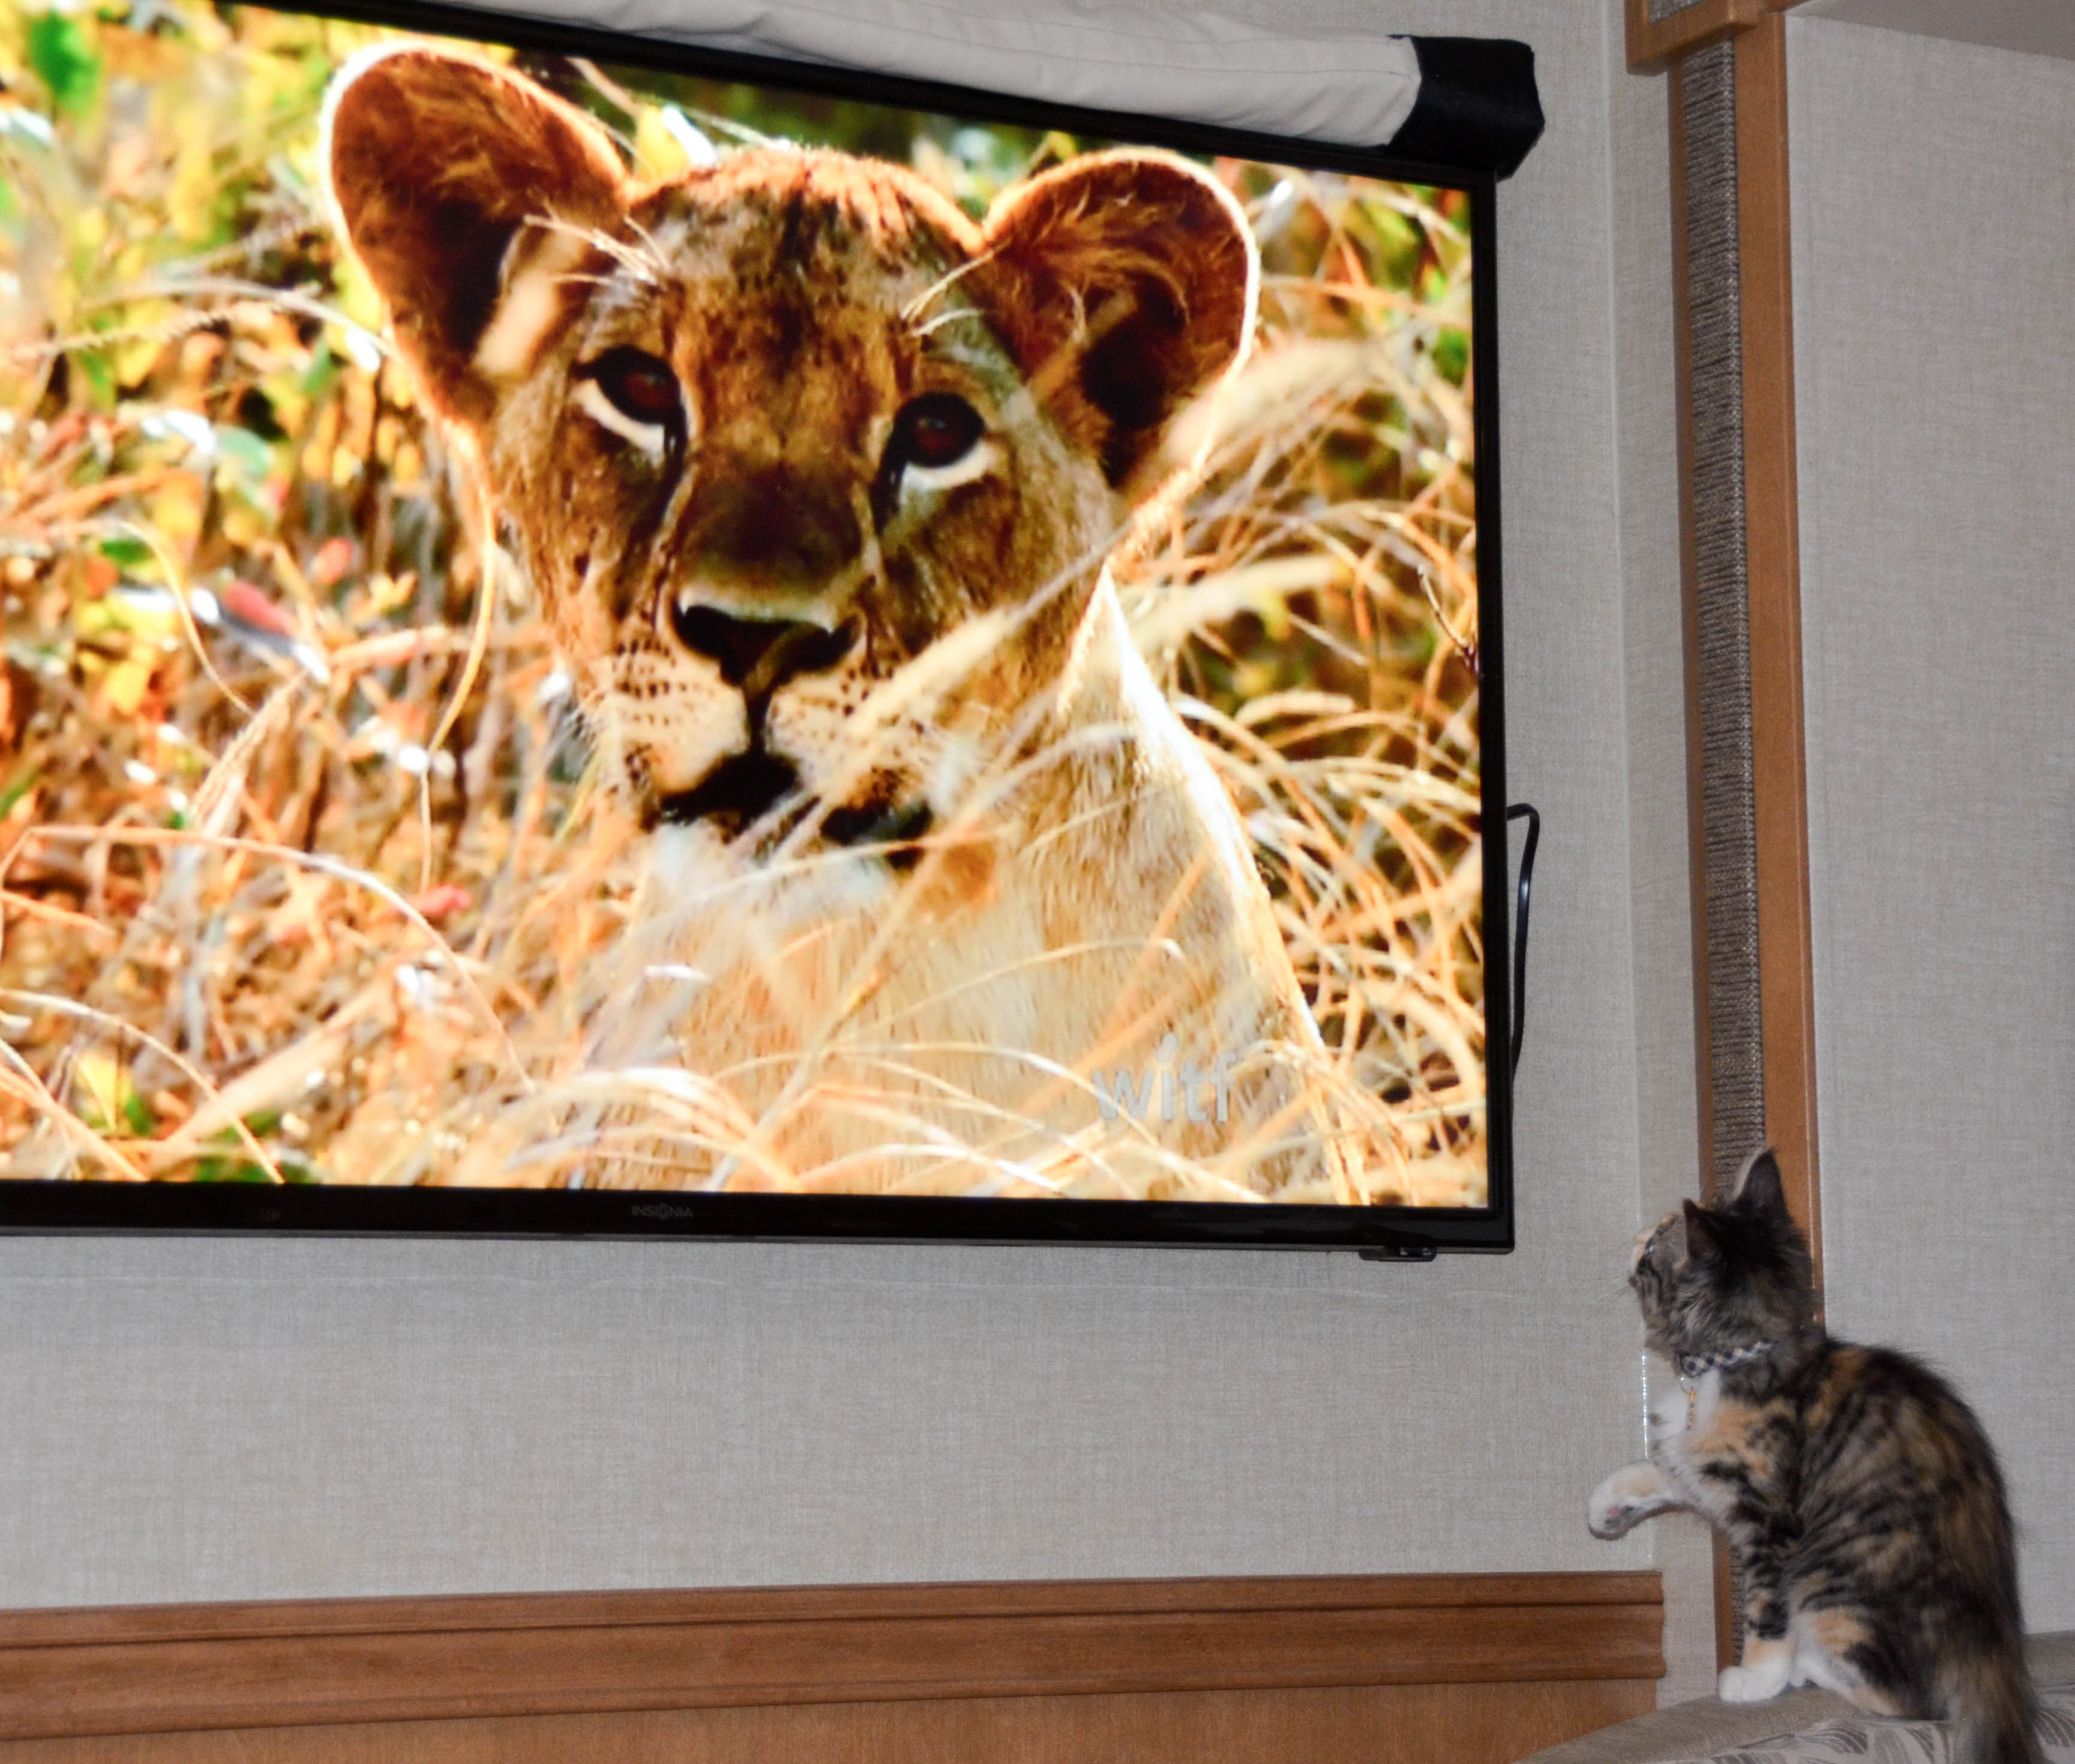 Gypsy was fascinated by the lions.